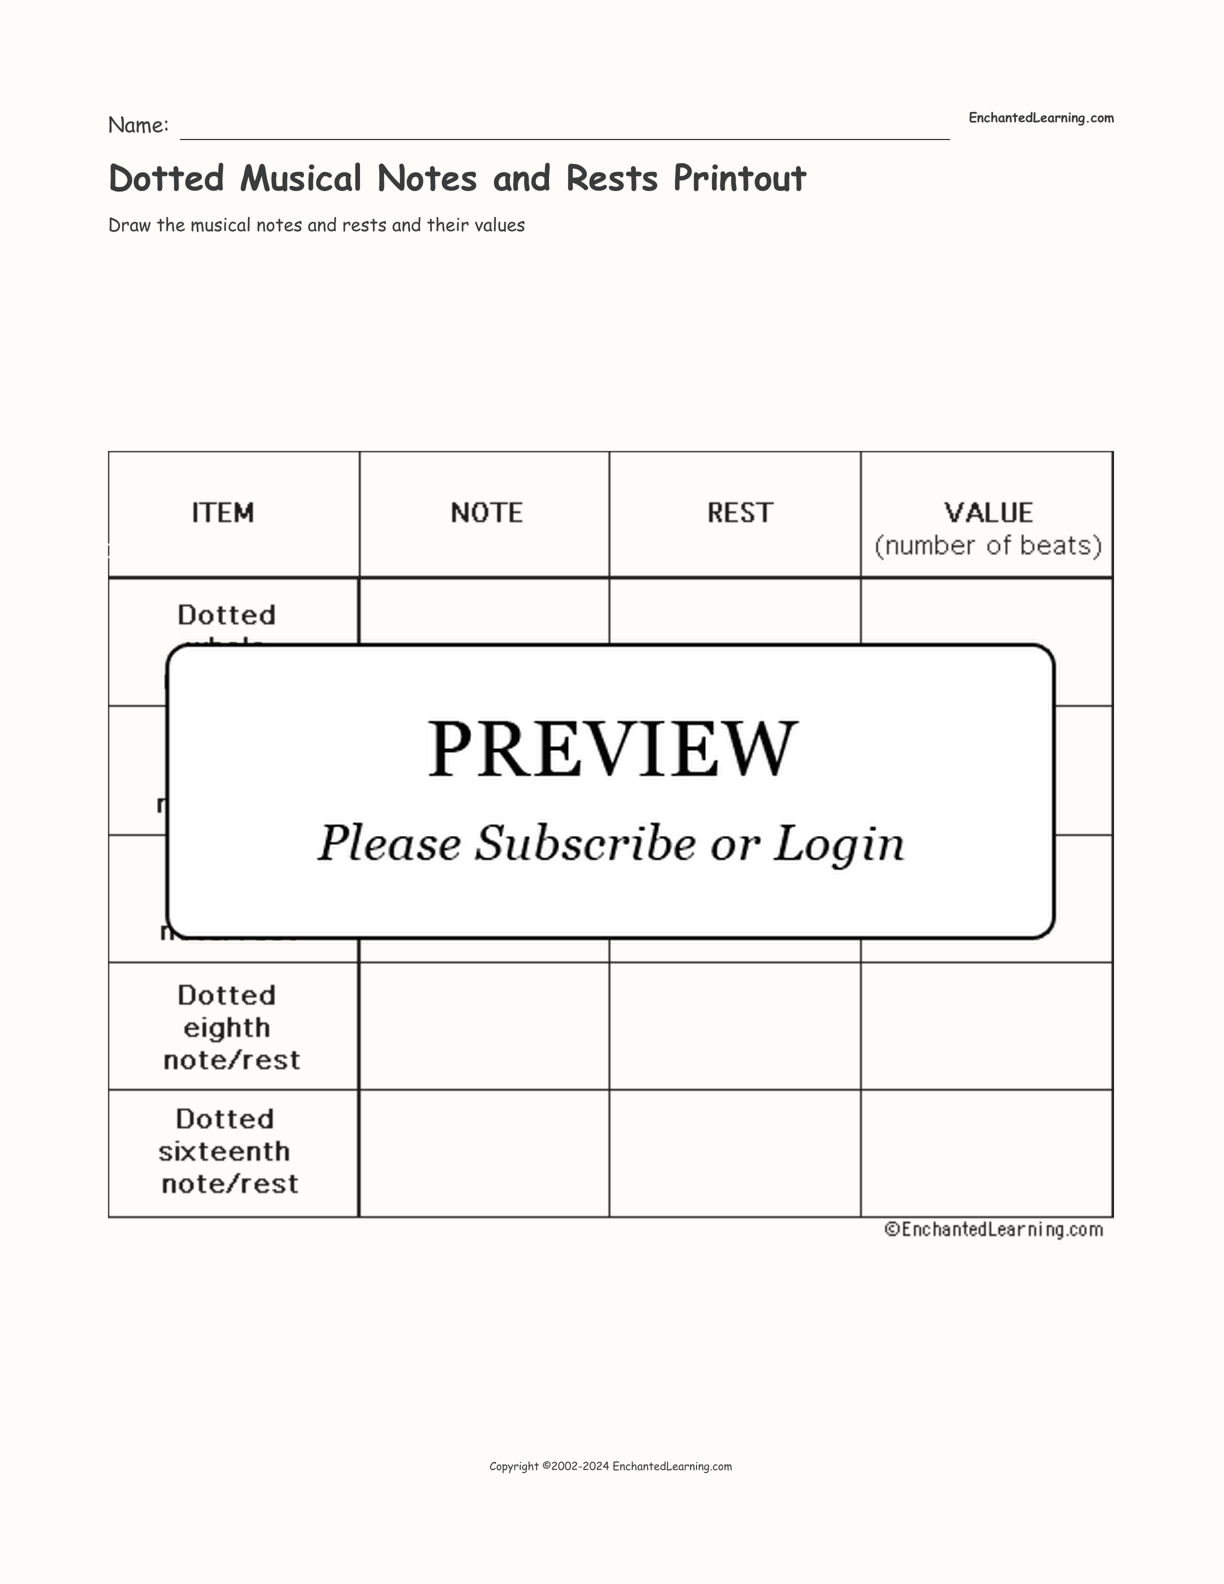 Dotted Musical Notes and Rests Printout interactive worksheet page 1